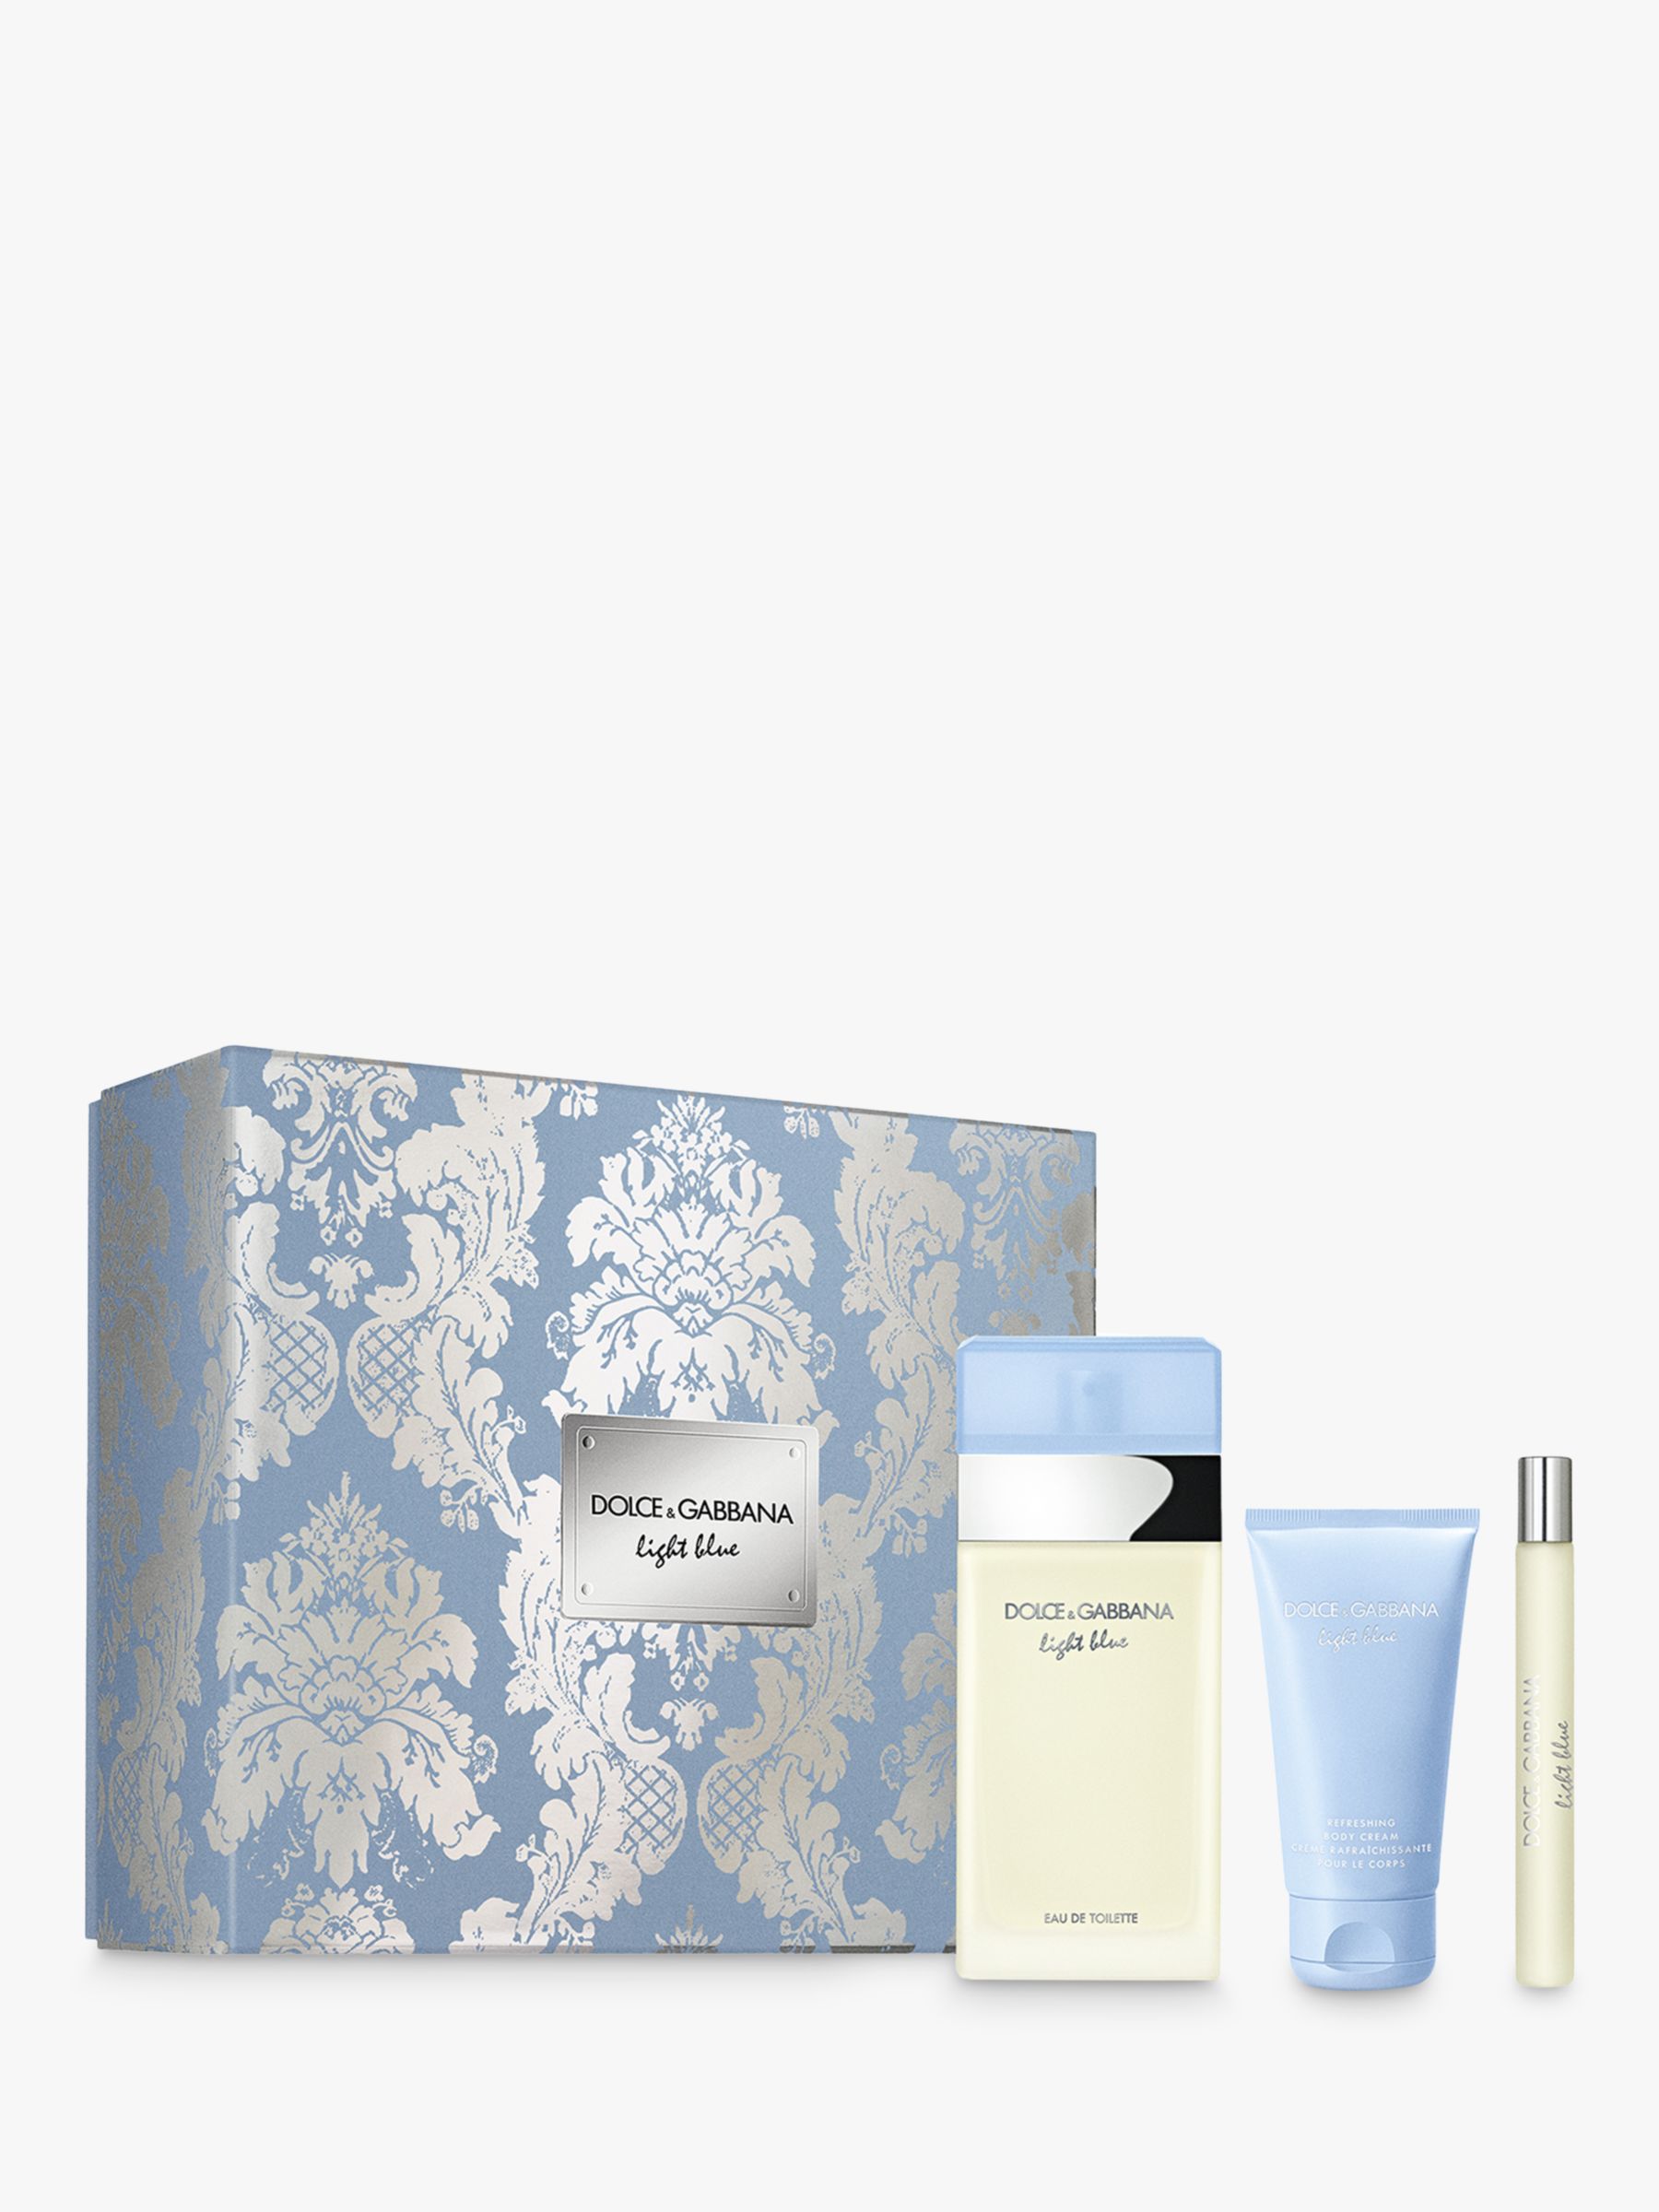 dolce and gabbana light blue gift pack